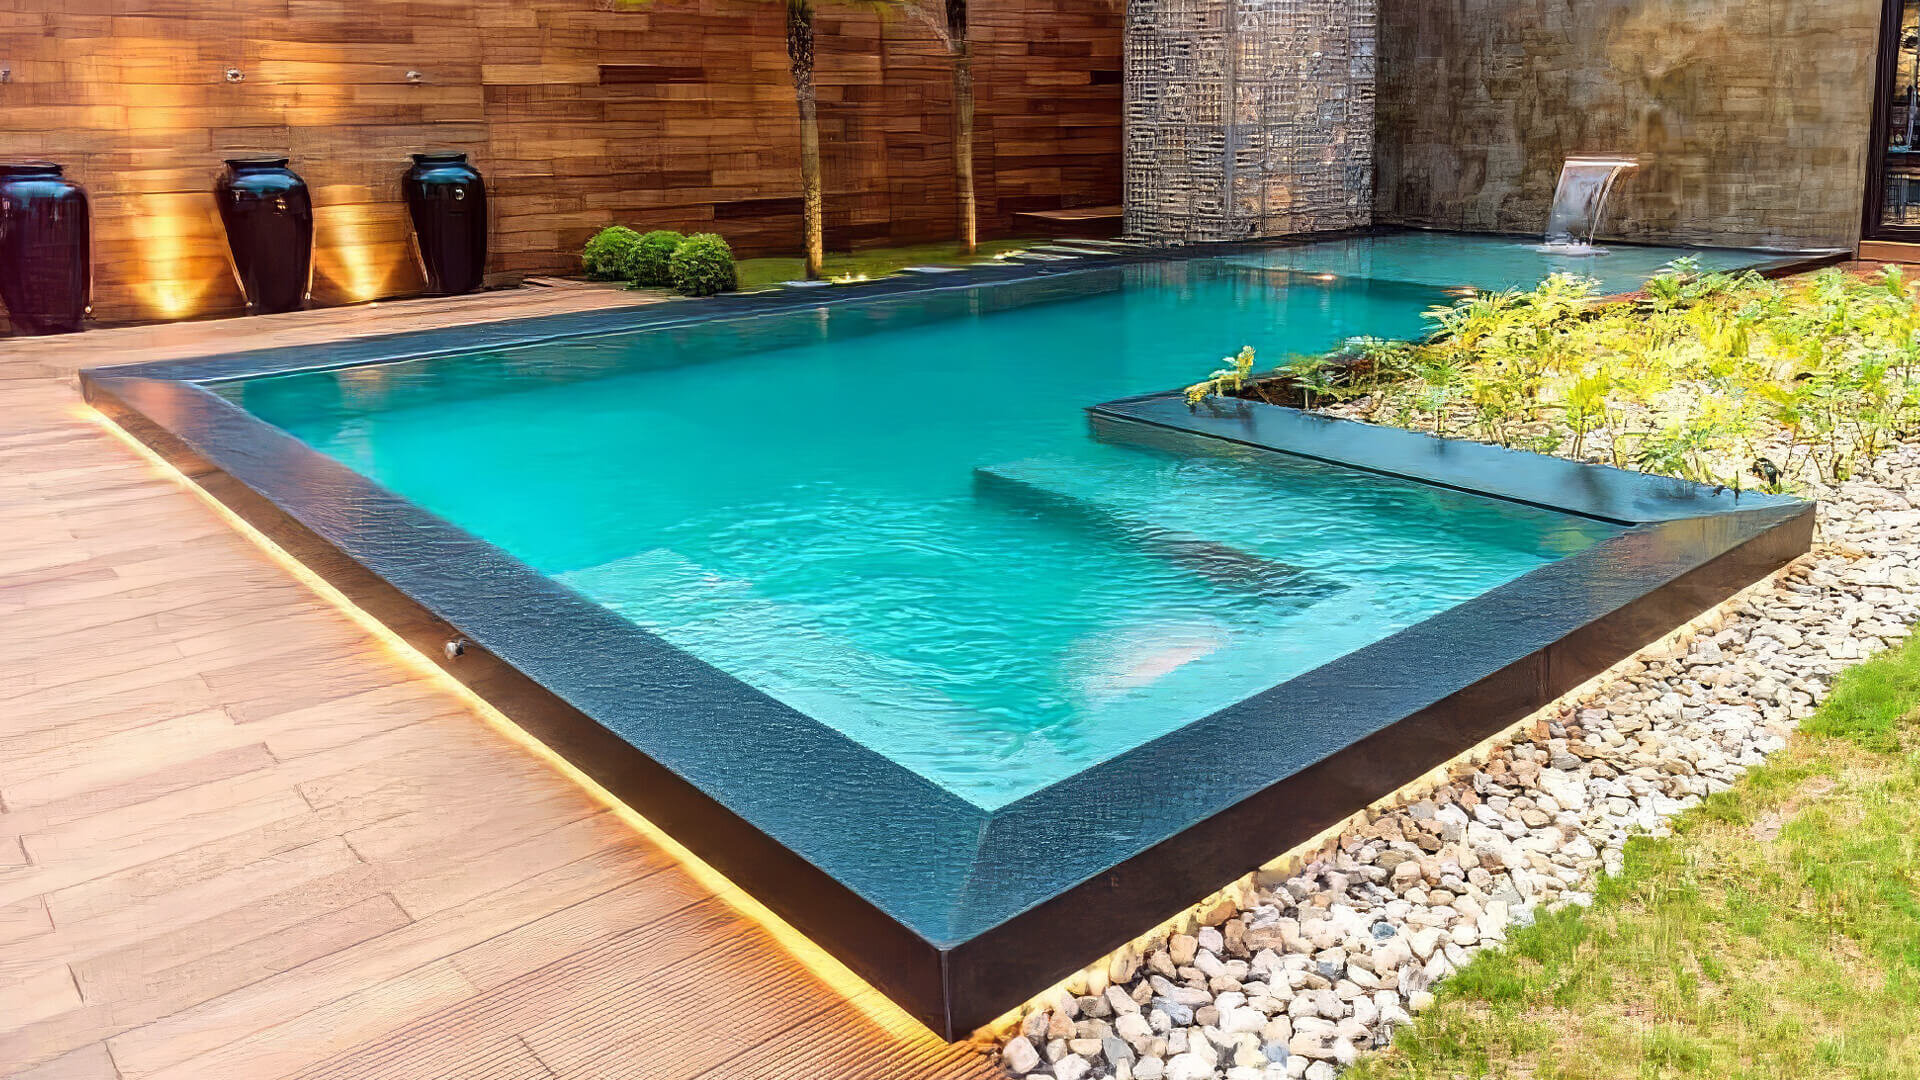 Here Are Some Exercises That Will Keep You Fit In Your Small Pool (No Laps  Required!) - The Fibreglass Pool Company